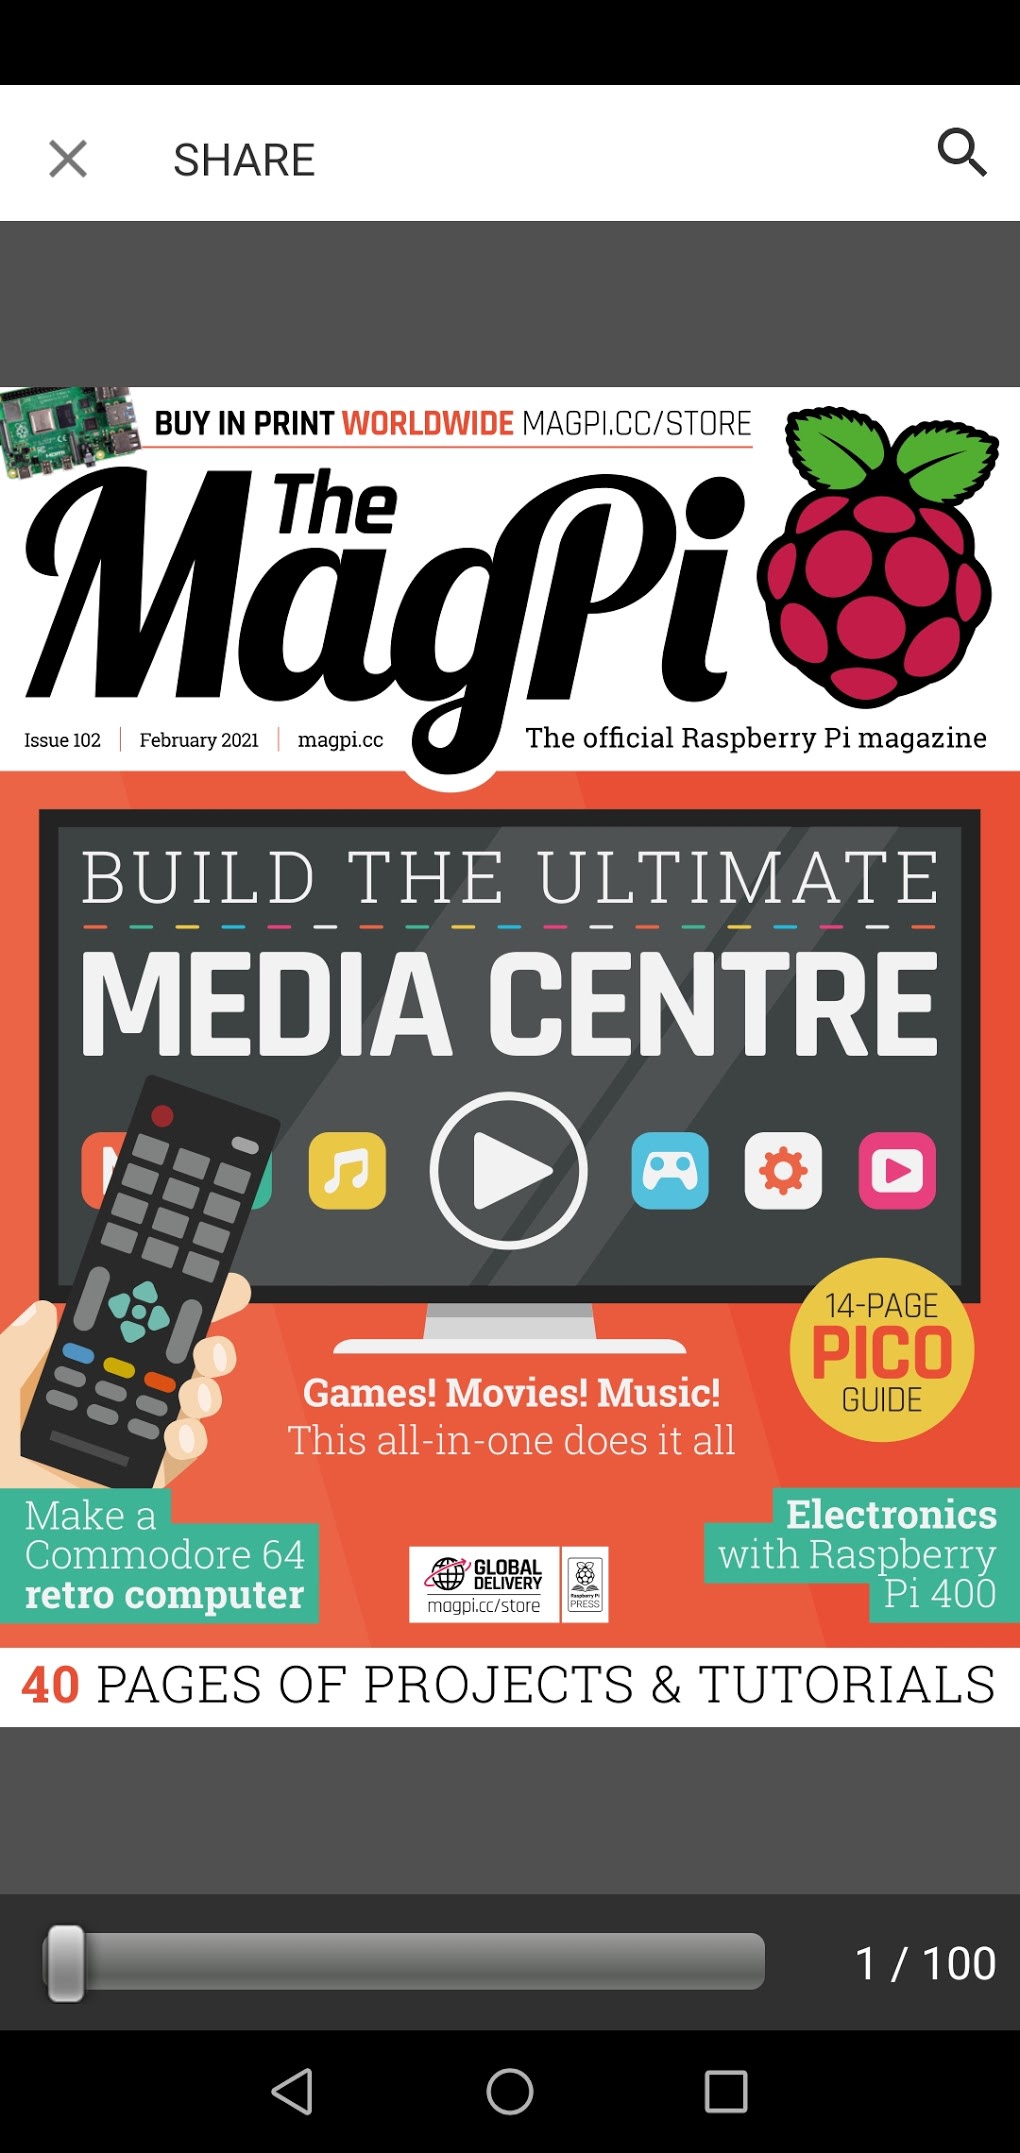 How to install NOOBS on a Raspberry Pi — The MagPi magazine